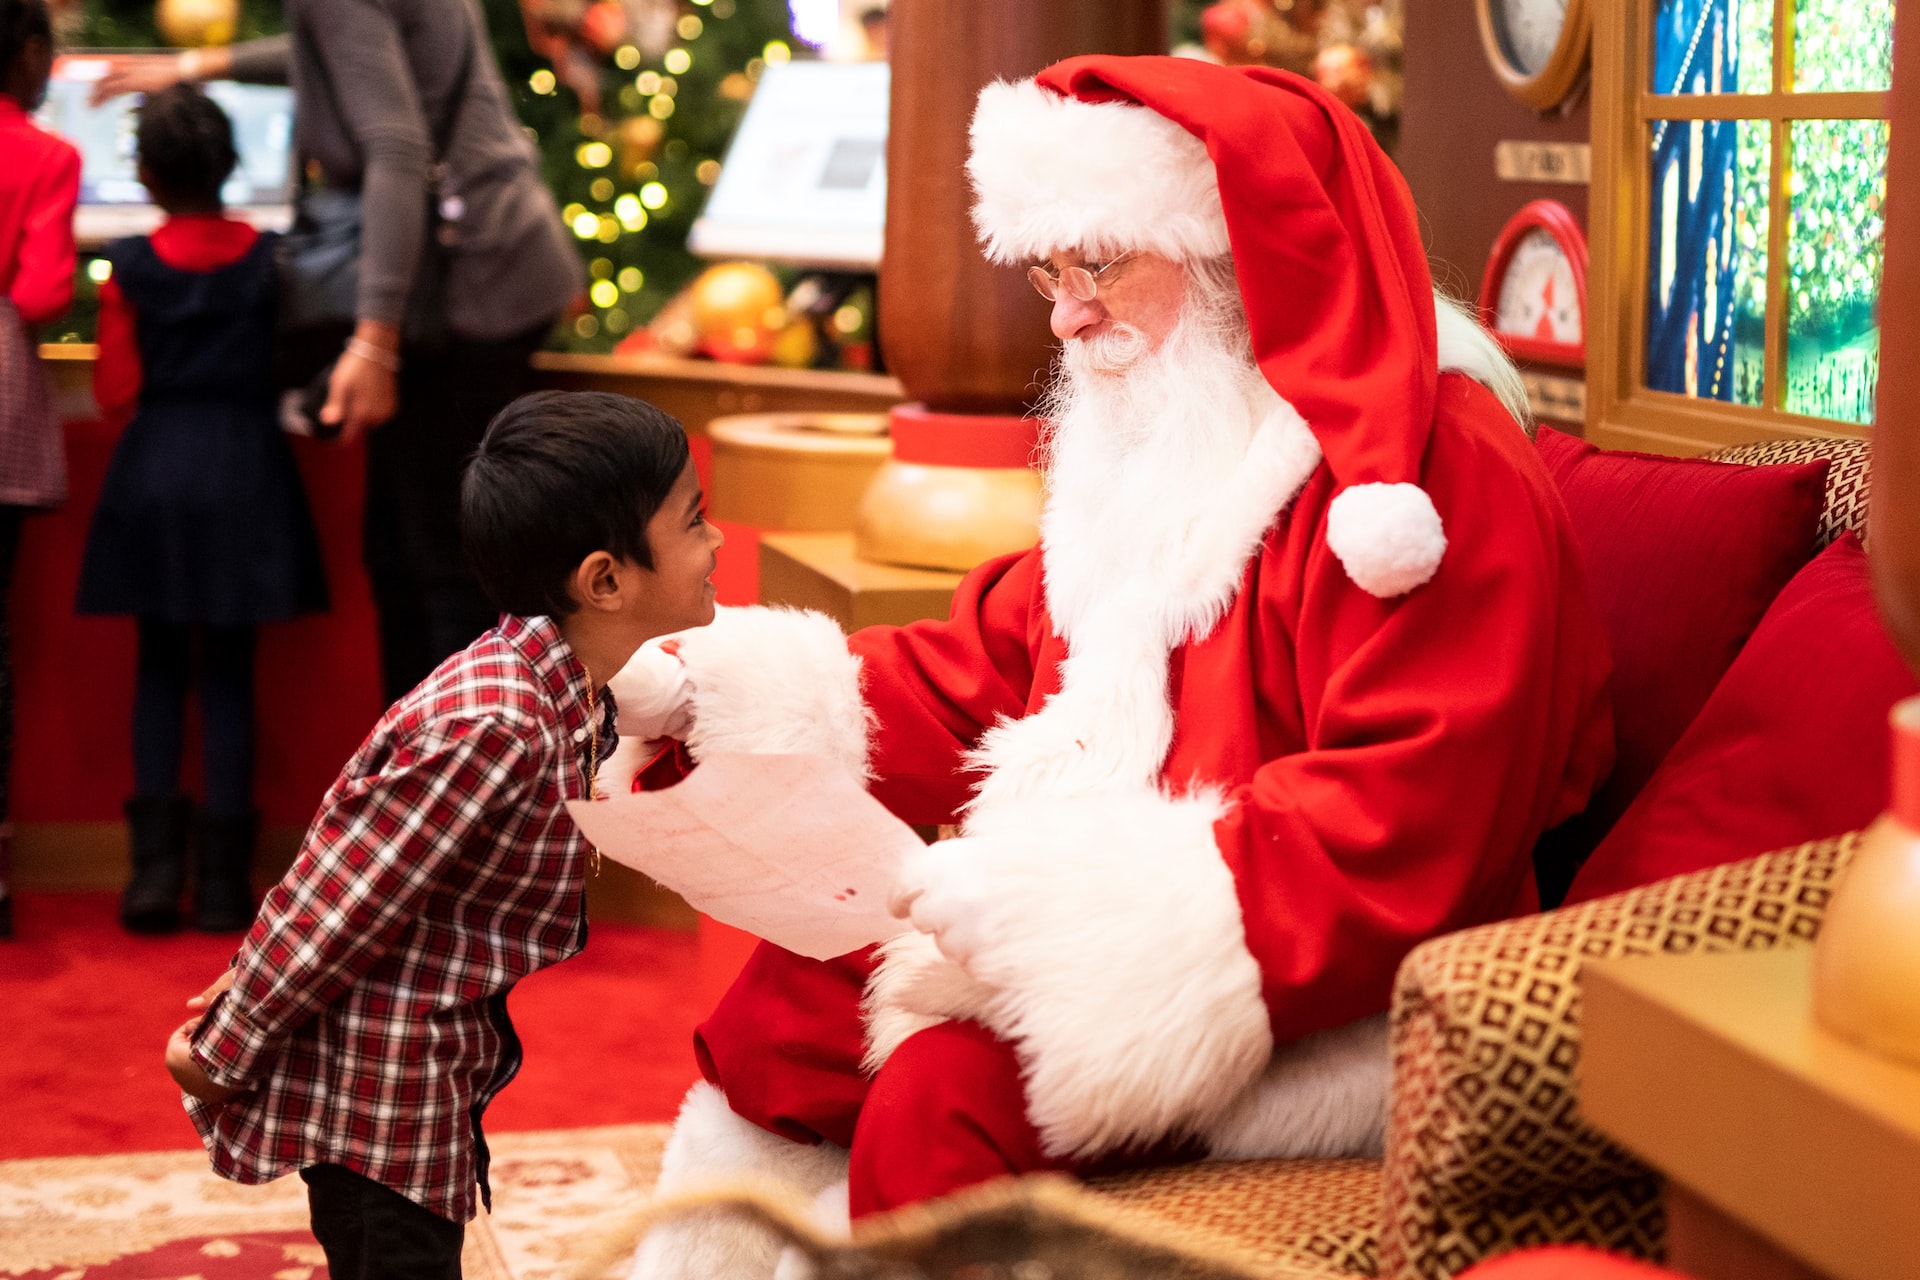 Santa Claus - When Kids Start Asking, “Is He Real?”